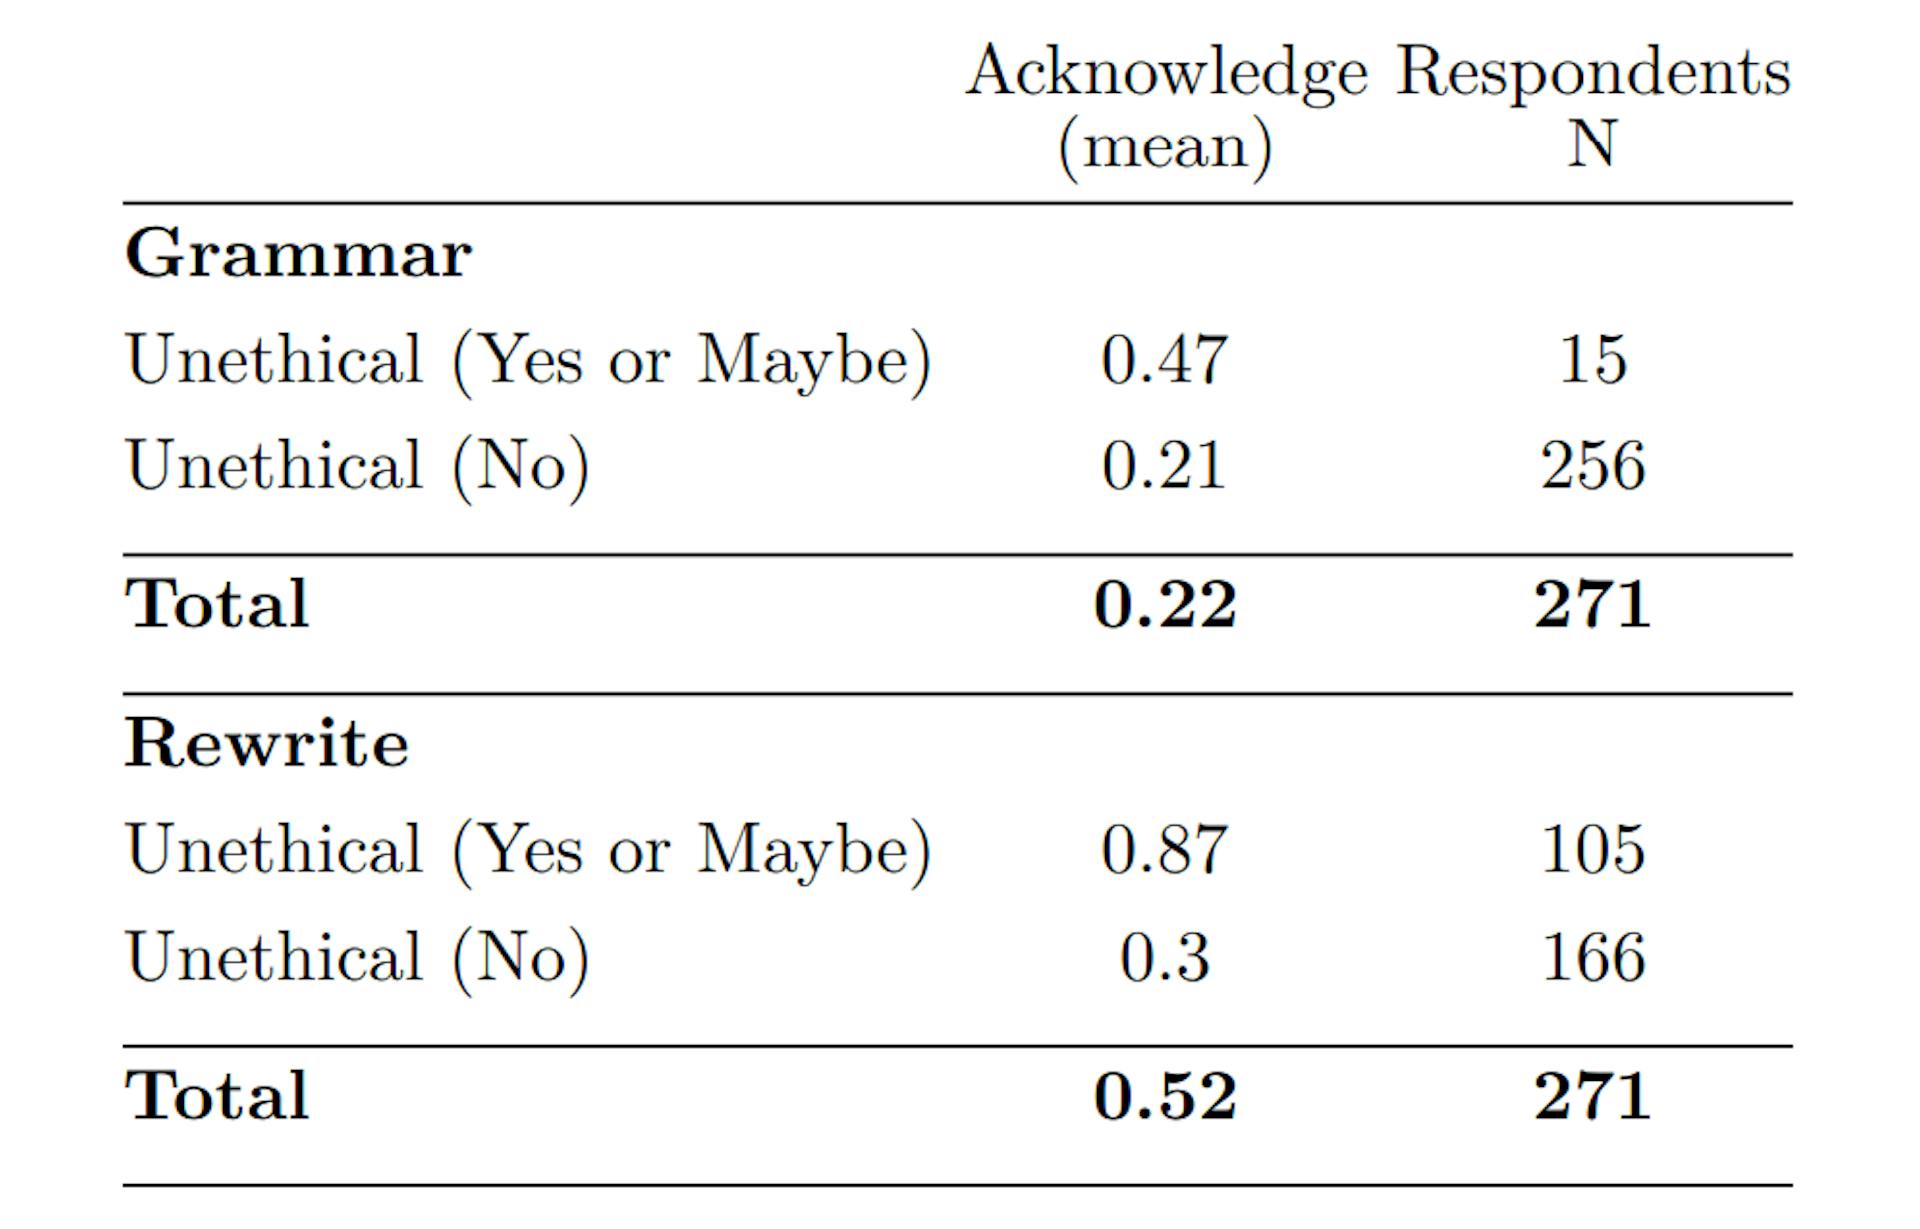 Table 5: The average perception of researchers regarding whether authors should report using the ChatGPT for assistance in manuscript preparation is grouped by whether the respondent thinks it is unethical to use it to fix grammar or rewrite the academic text.